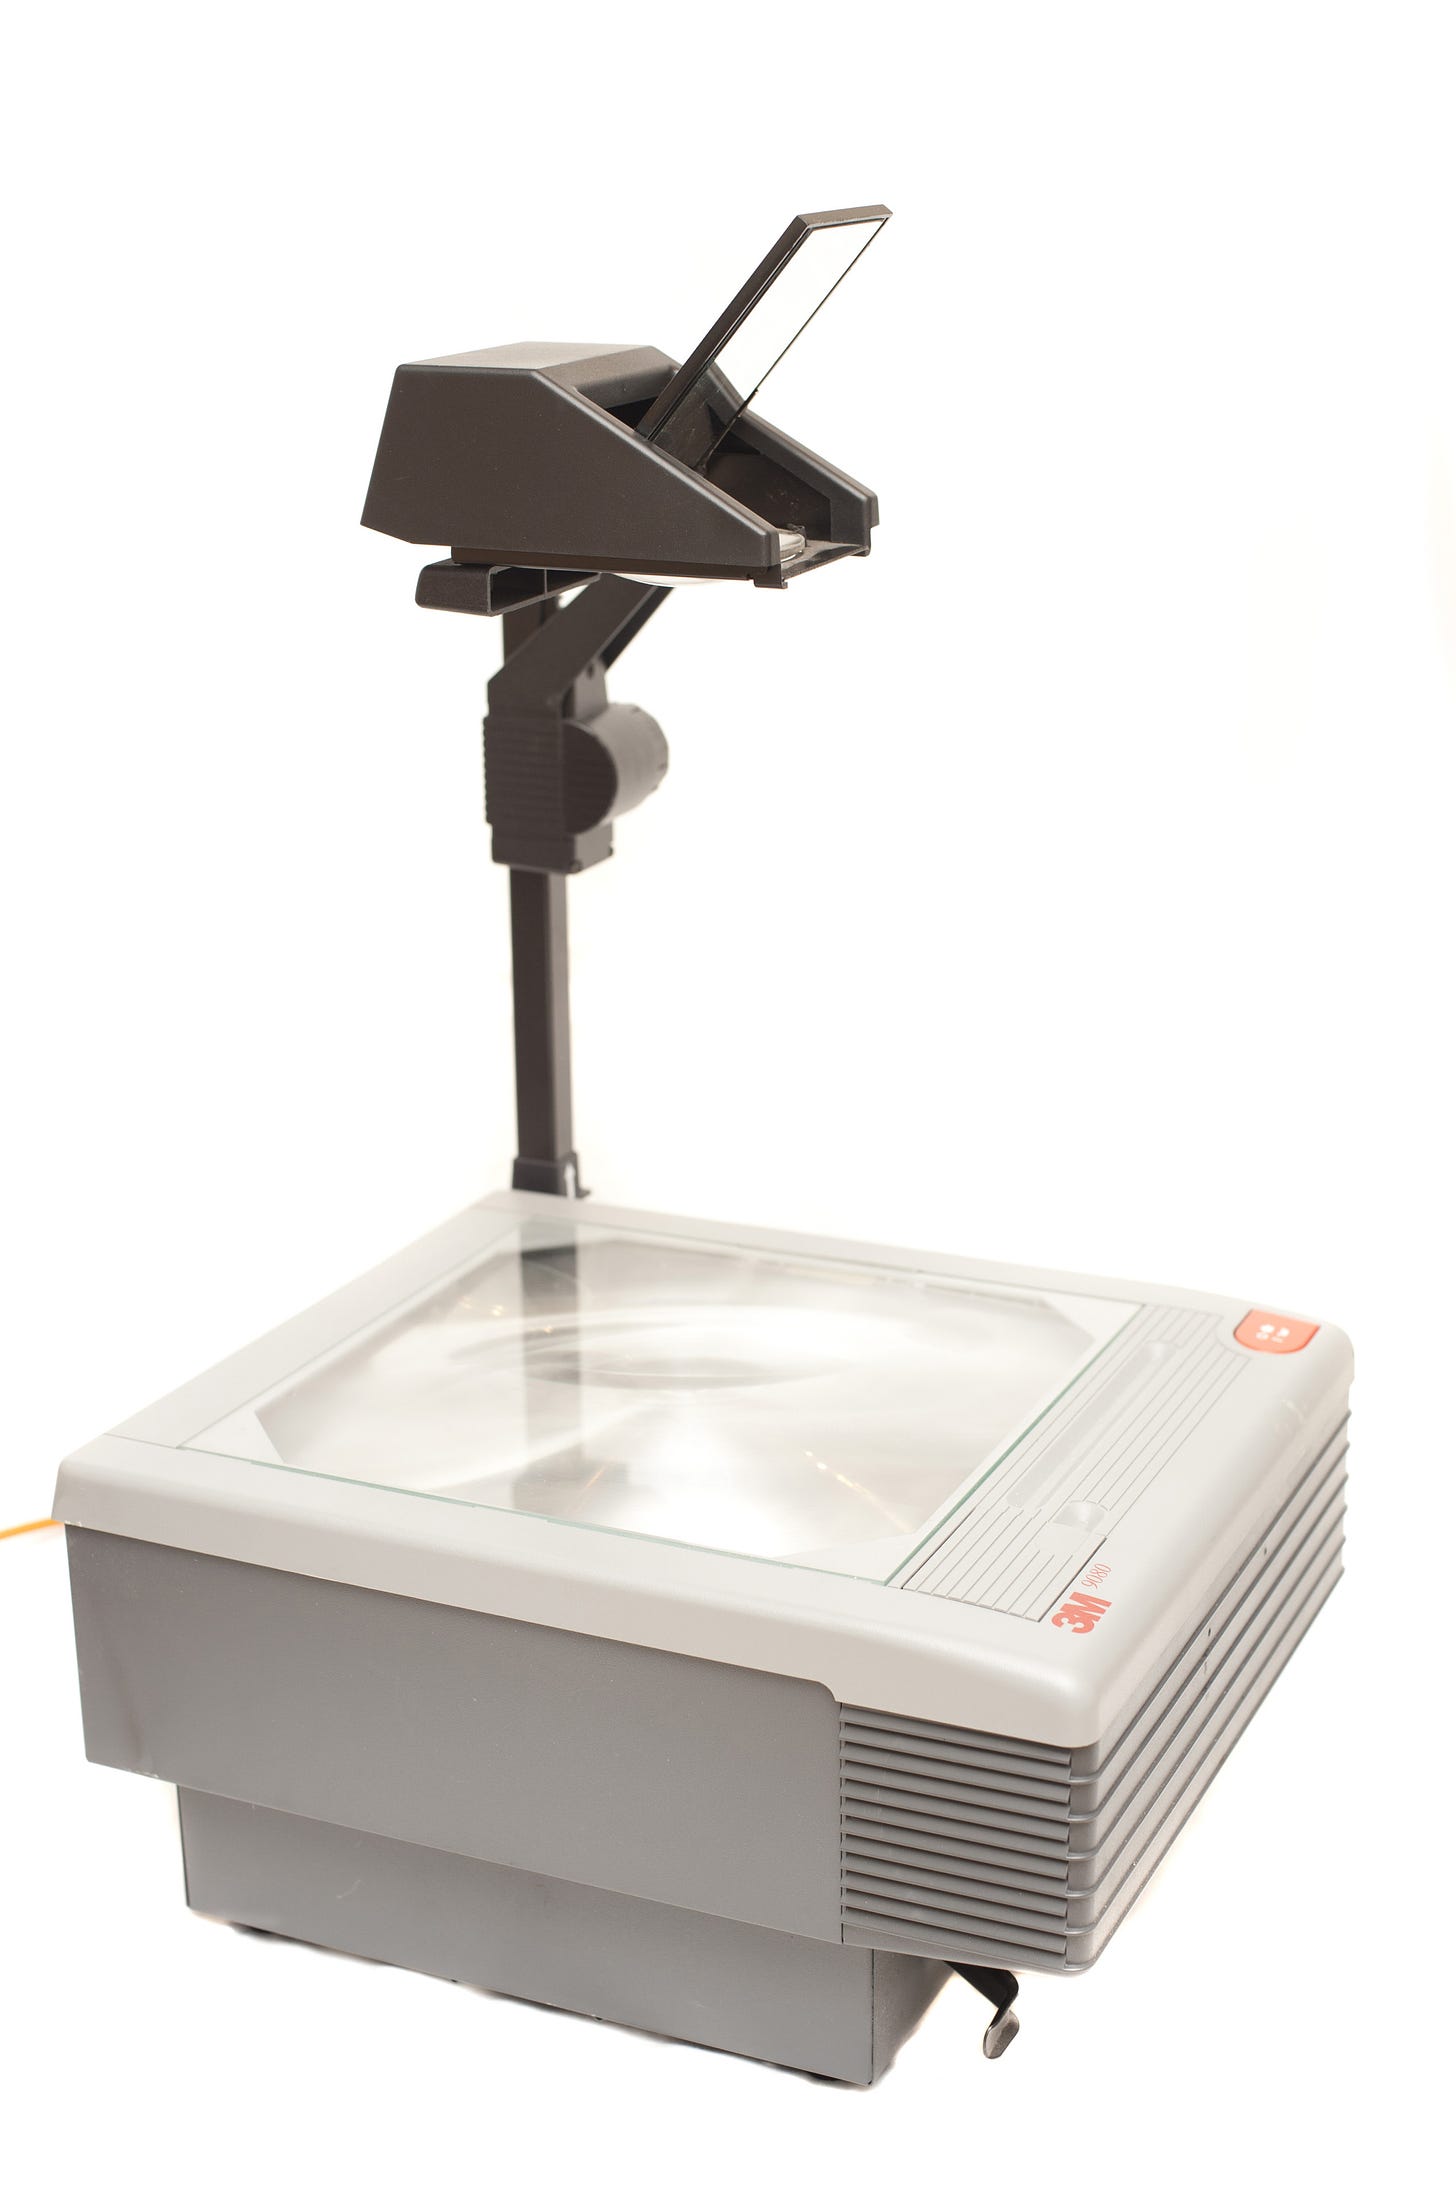 Free Image of Overhead Projector Isolated on White Background |  Freebie.Photography